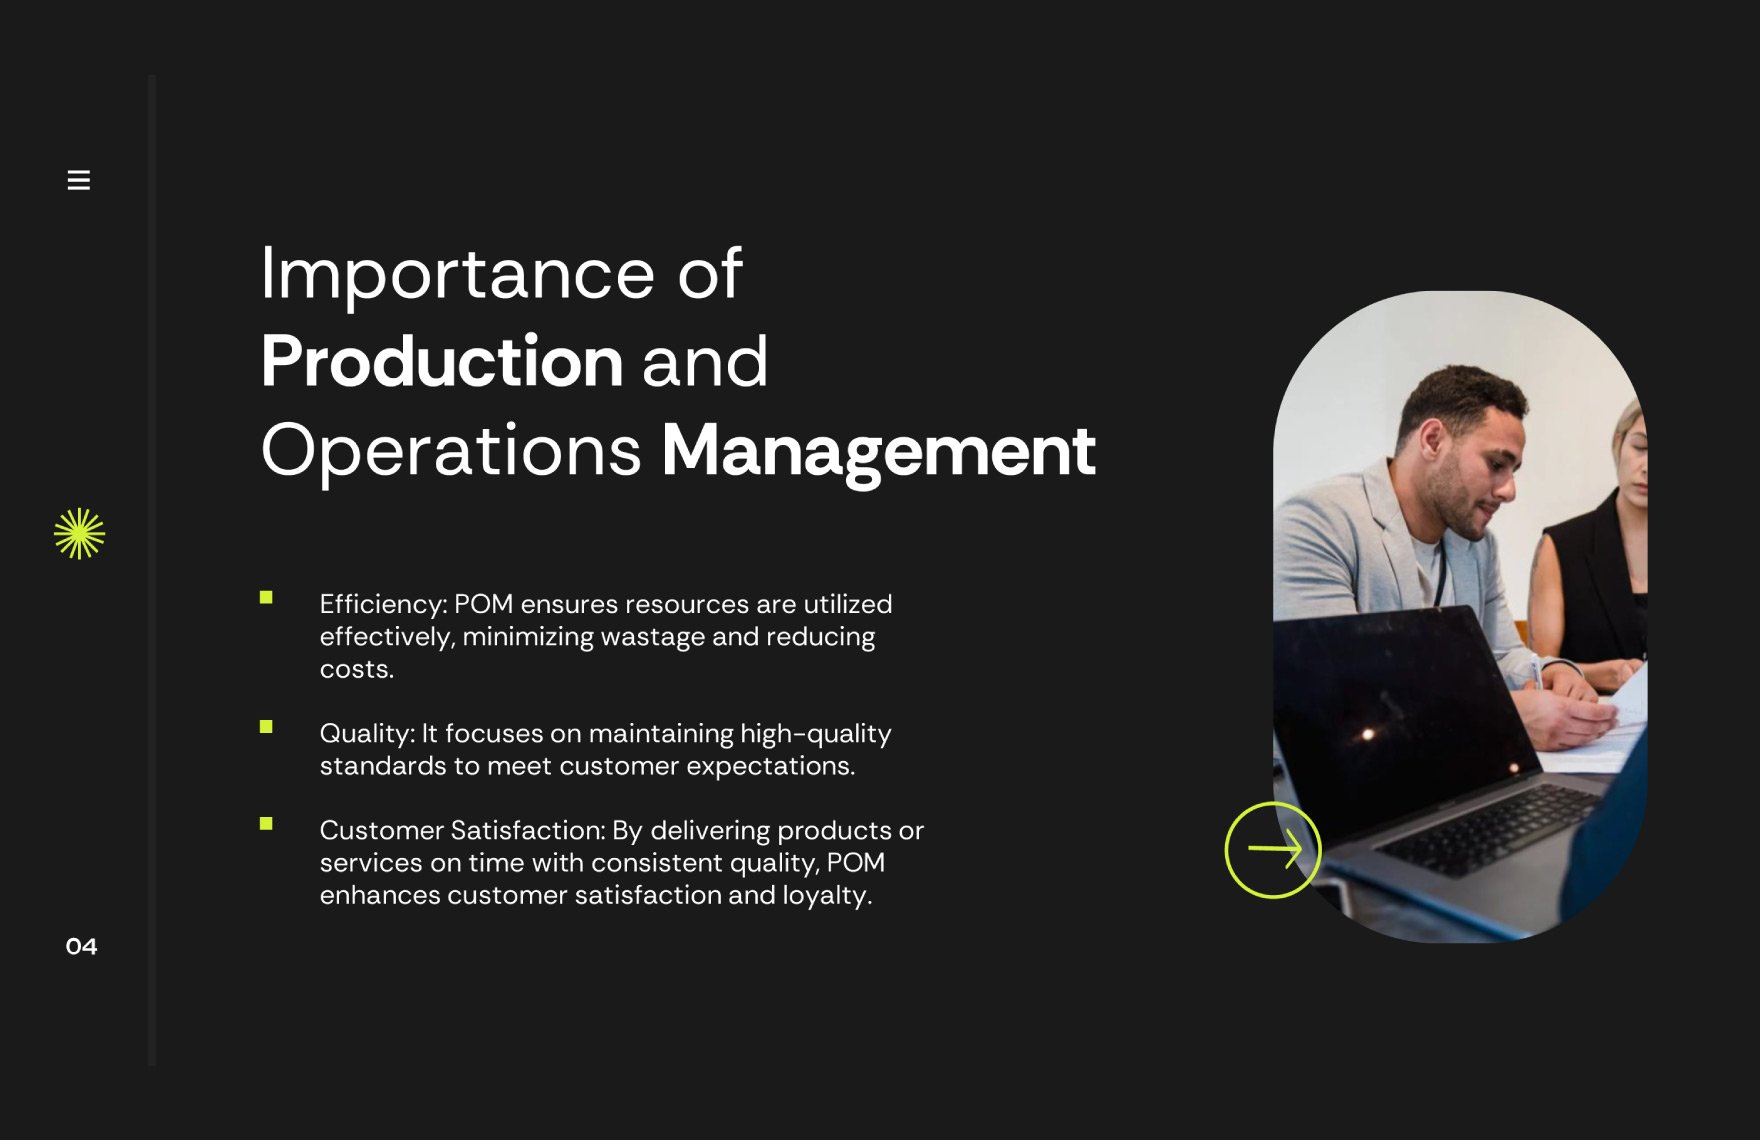 Production and Operations Management PPT Template